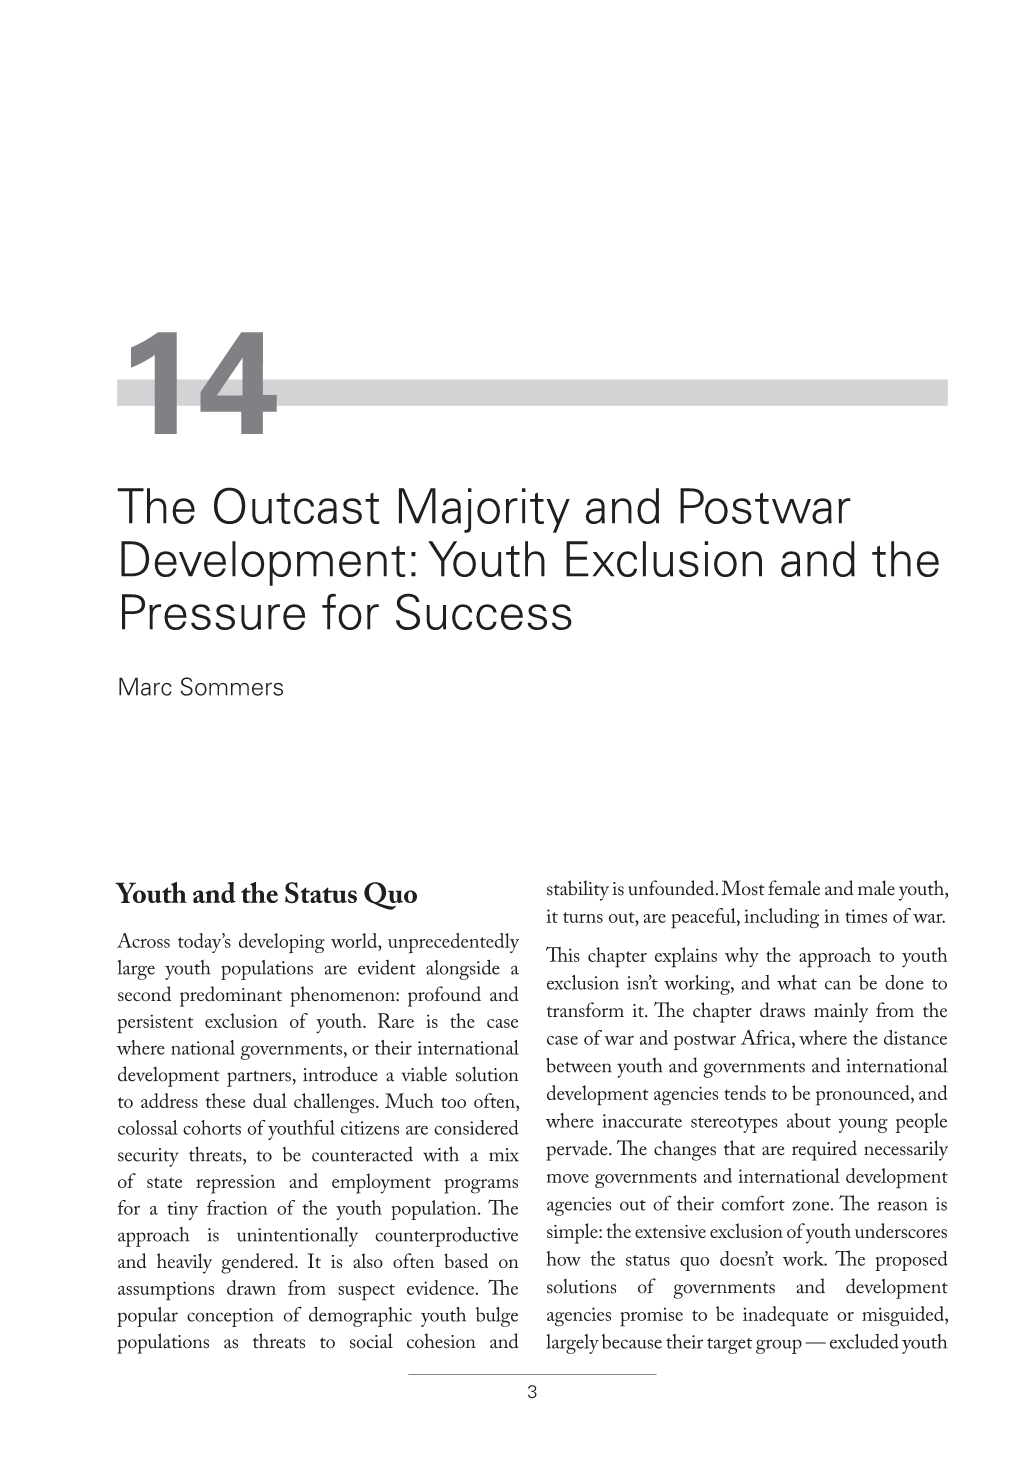 The Outcast Majority and Postwar Development: Youth Exclusion and the Pressure for Success